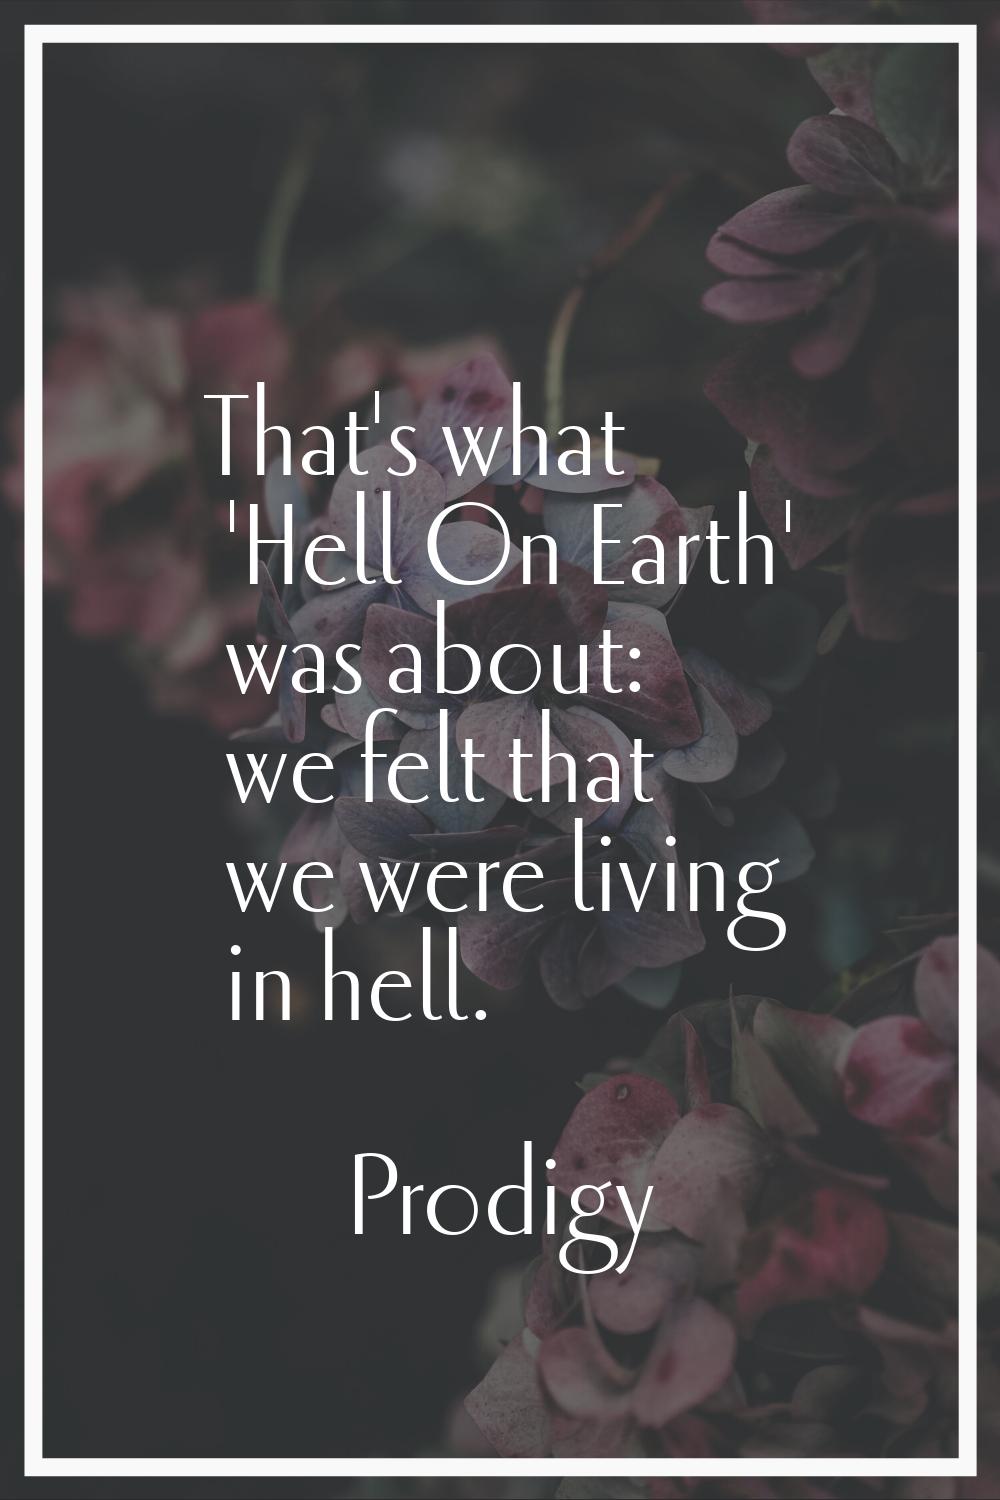 That's what 'Hell On Earth' was about: we felt that we were living in hell.